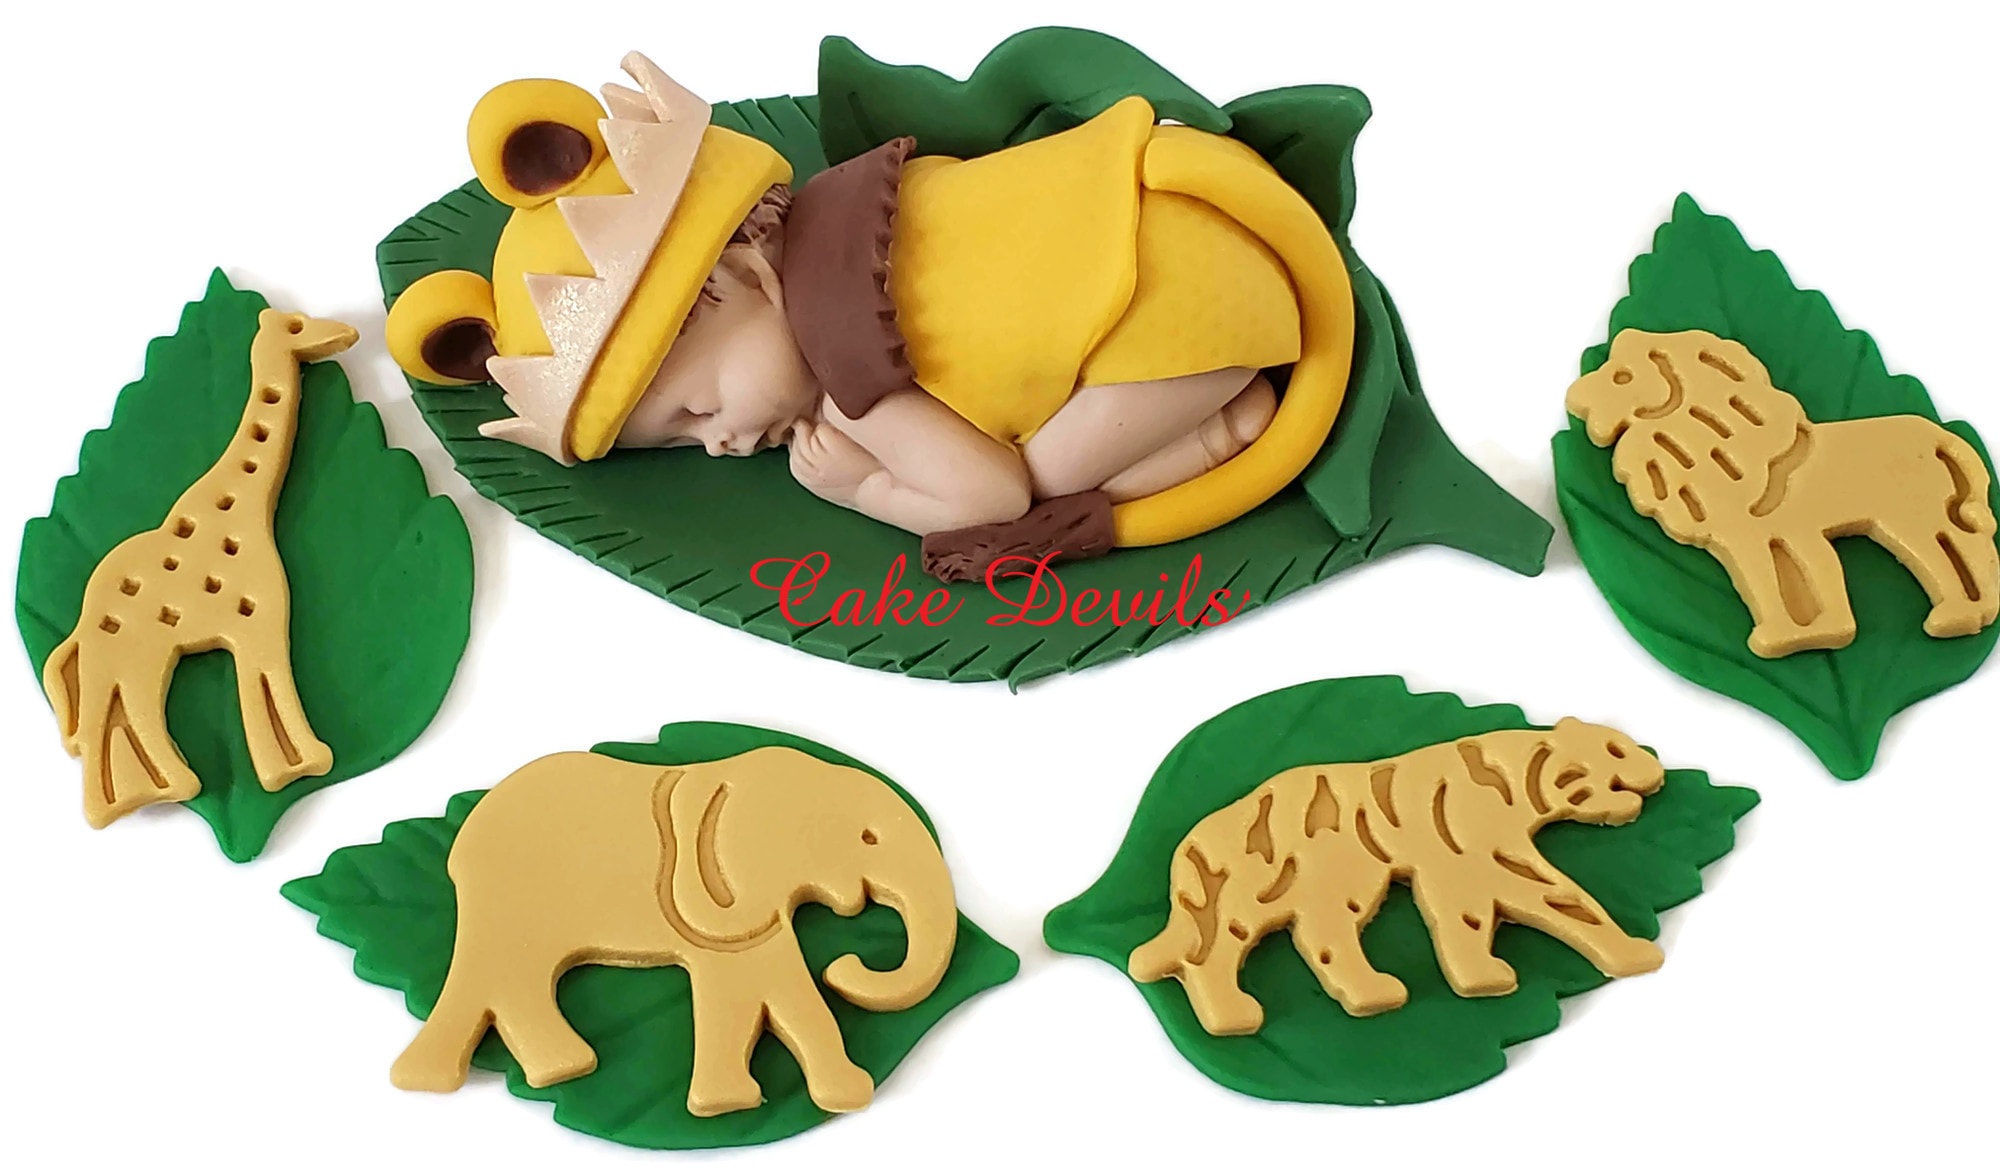 Lion Baby Shower Cake Topper Fondant Sleeping Baby King Of The Jungle Baby Shower Decorations Lion With Crown Handmade Edible